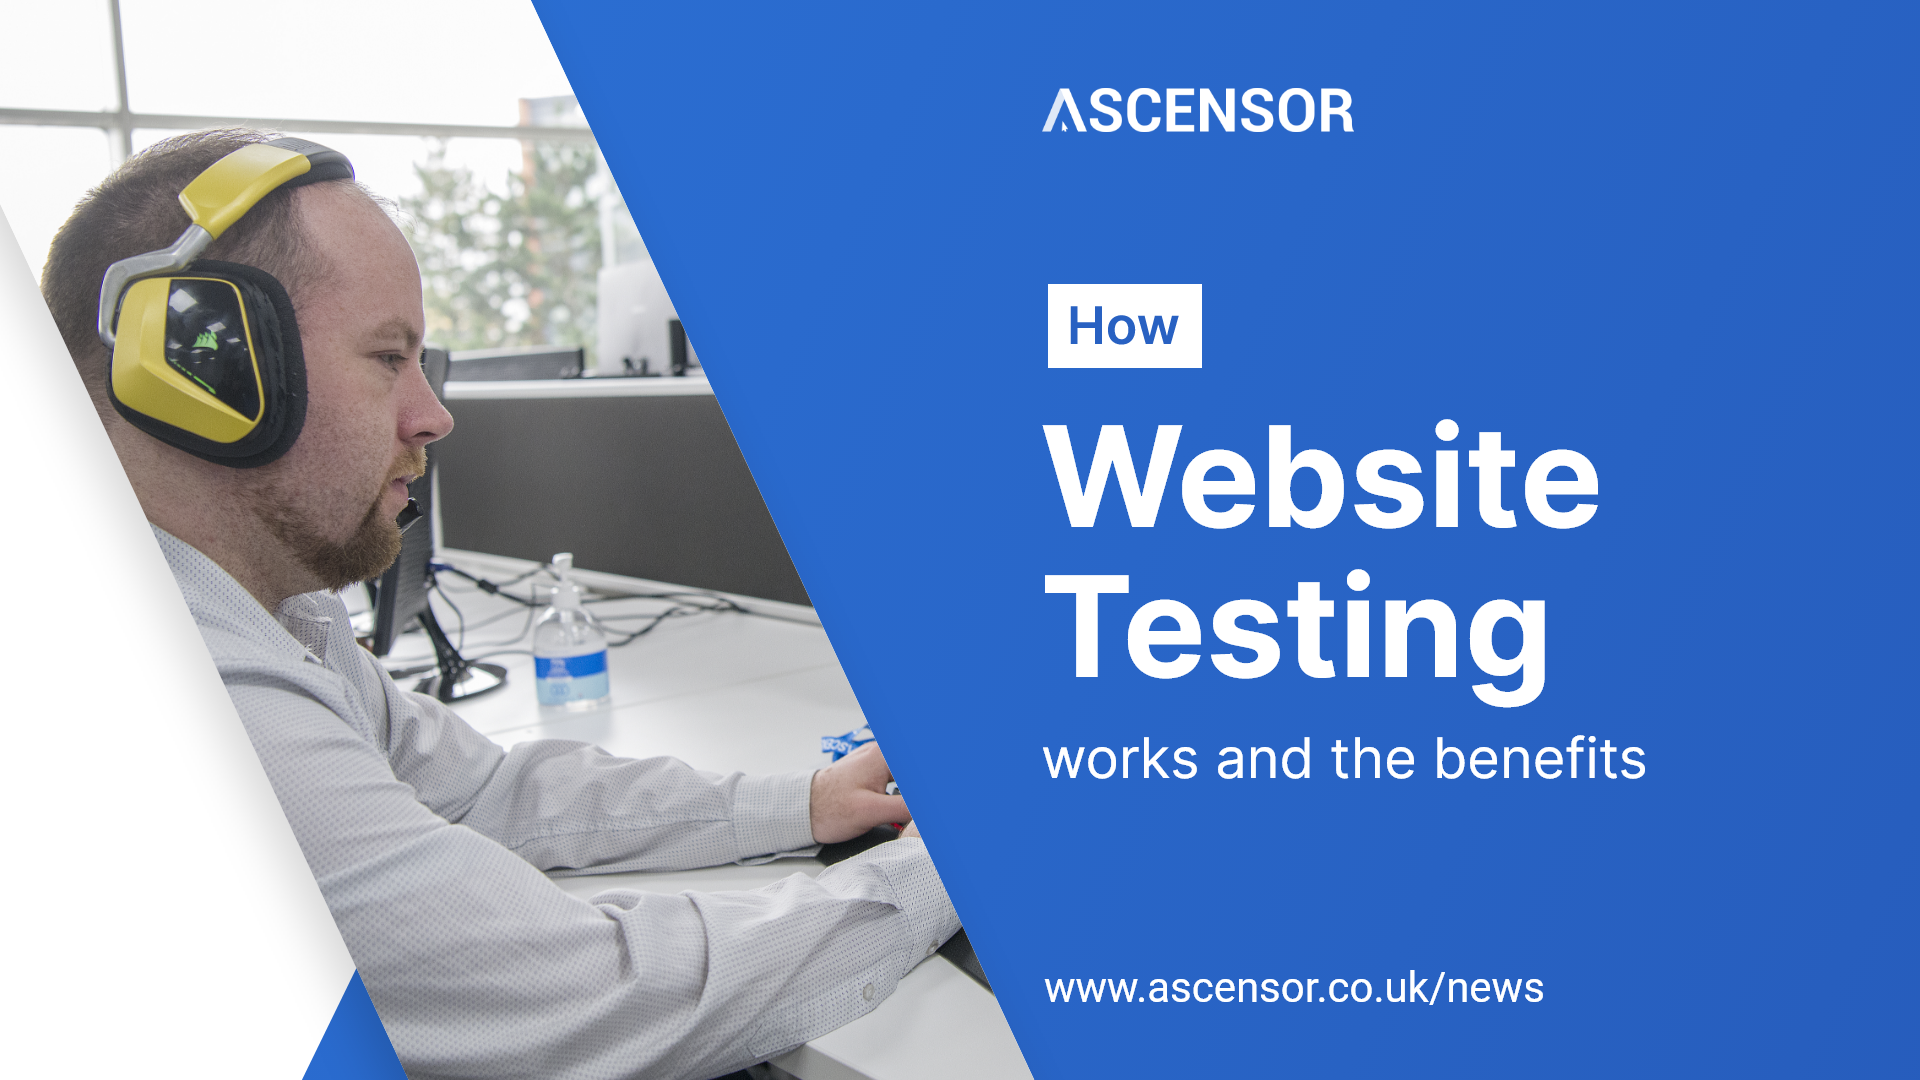 How does website testing work?